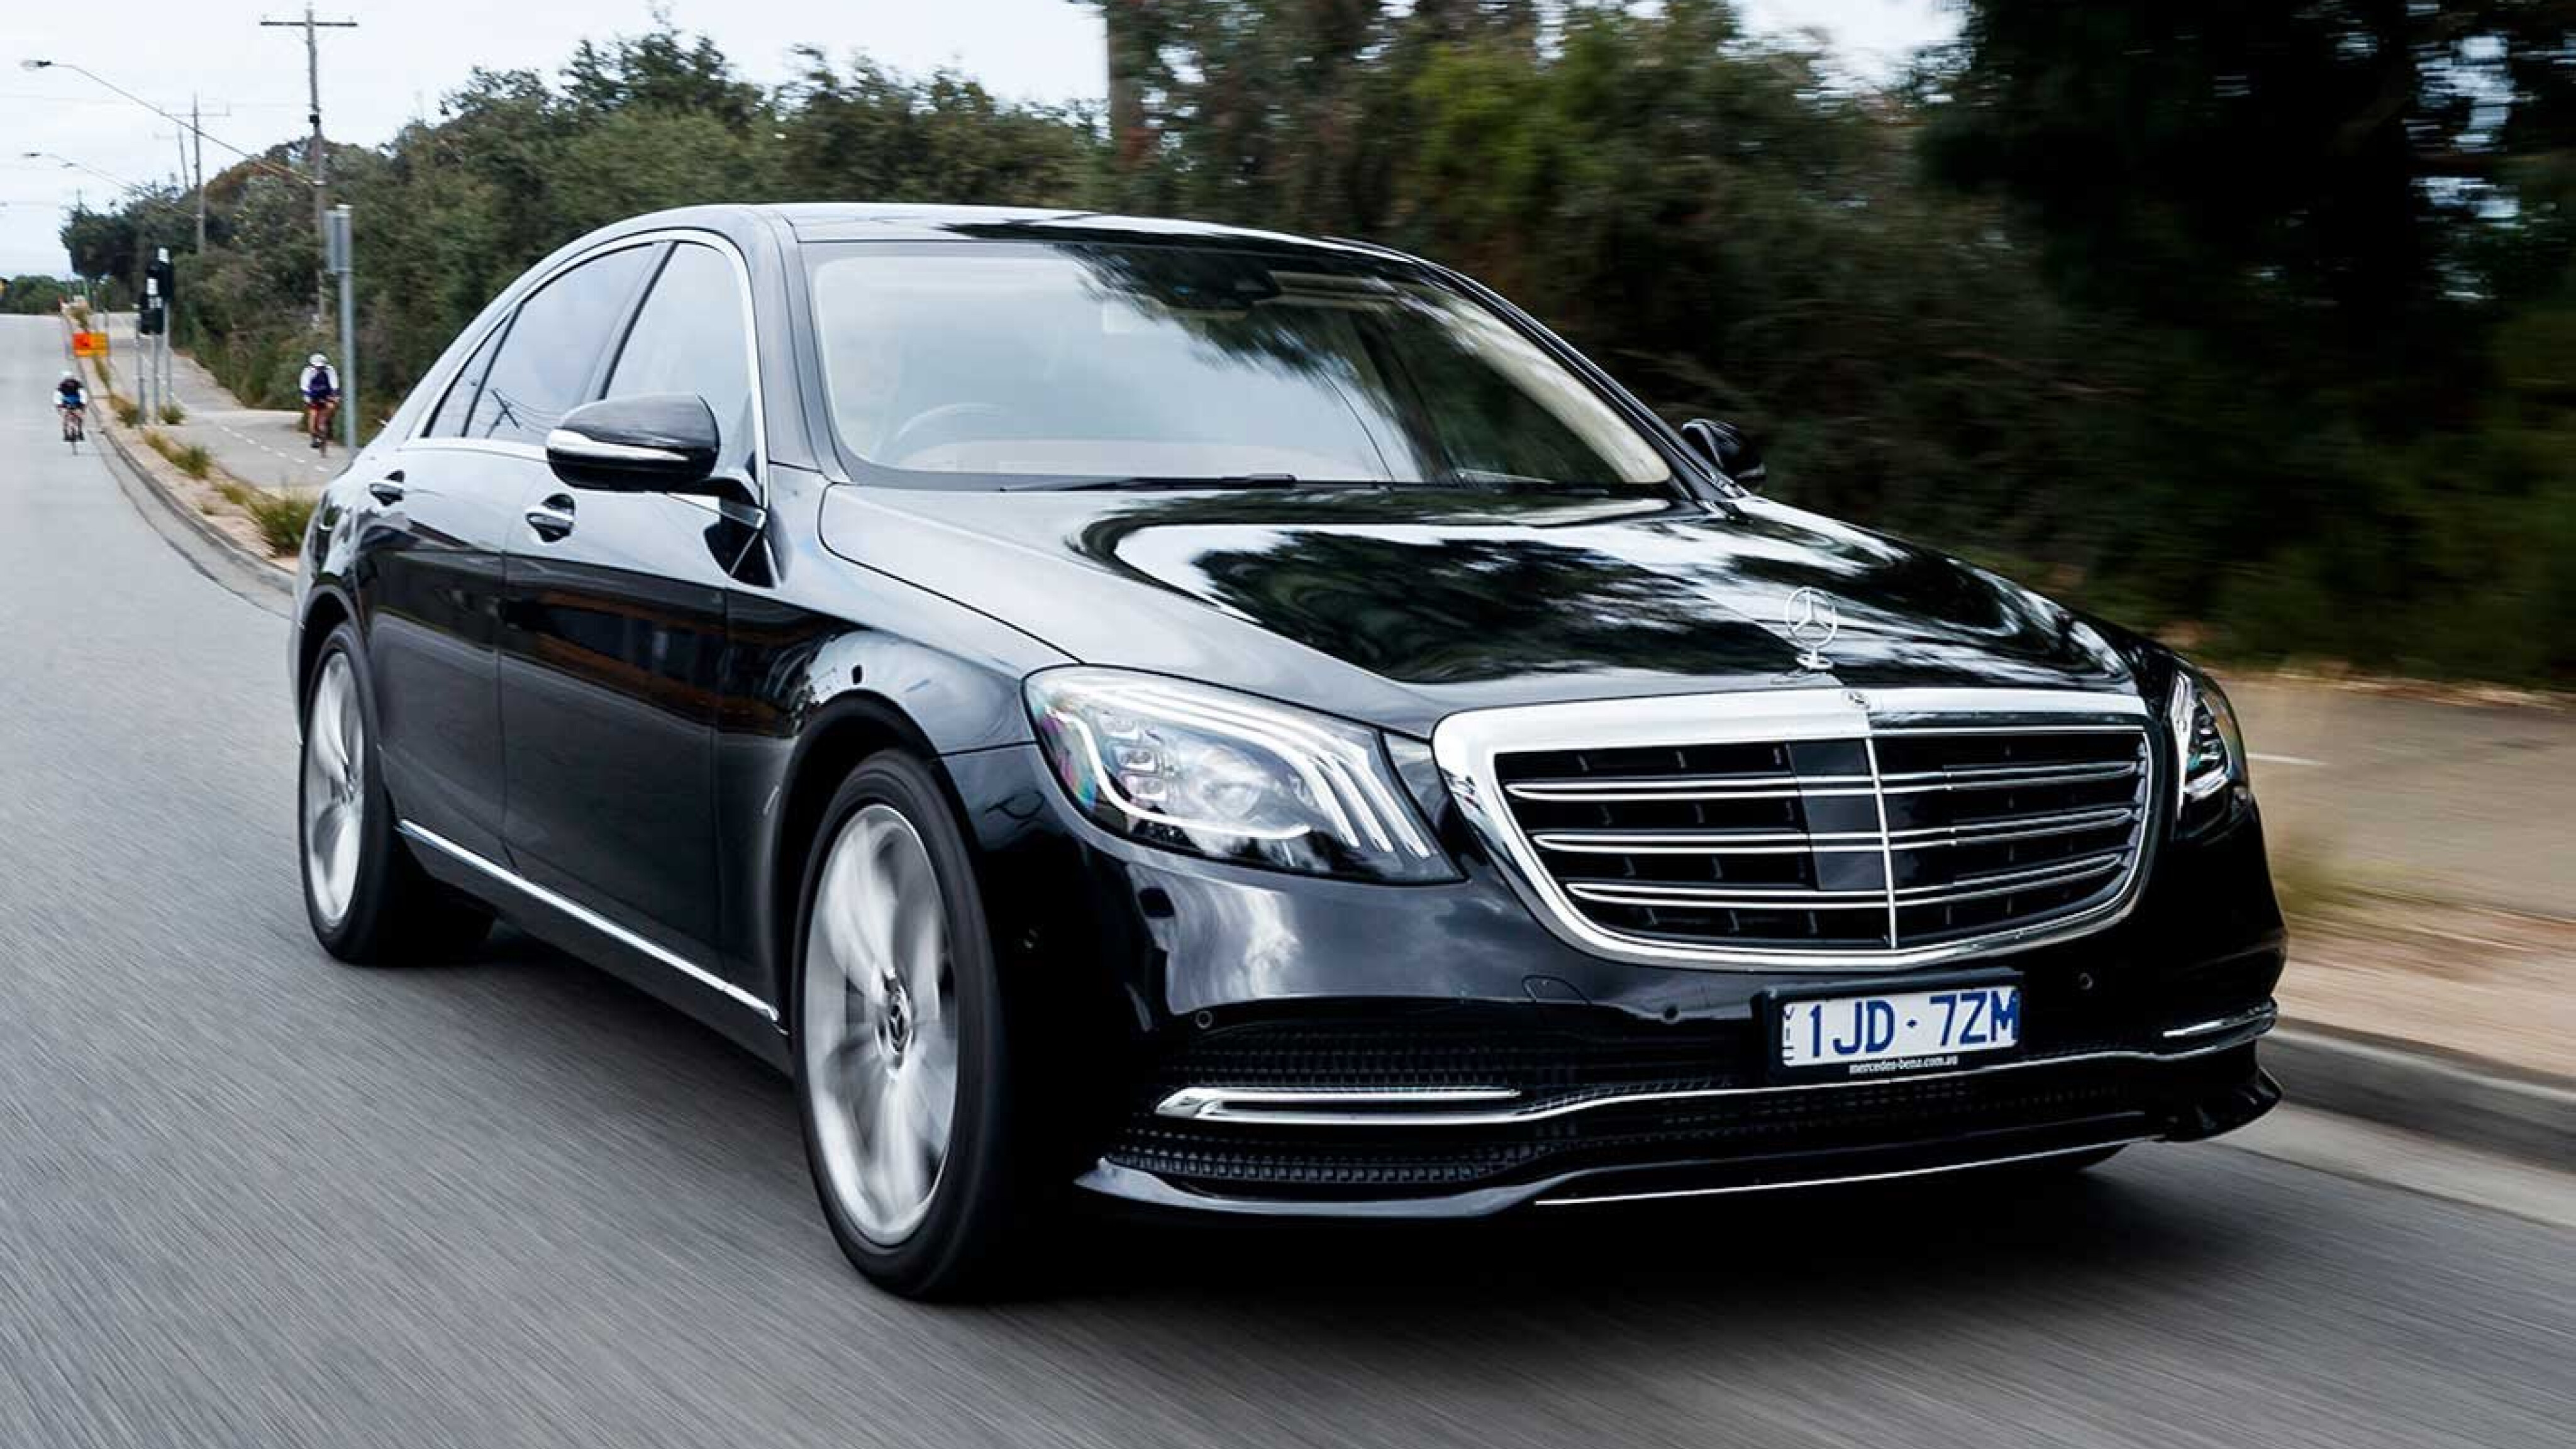 Mercedes-Benz S-Class S350d review: Likes, dislikes & other key points